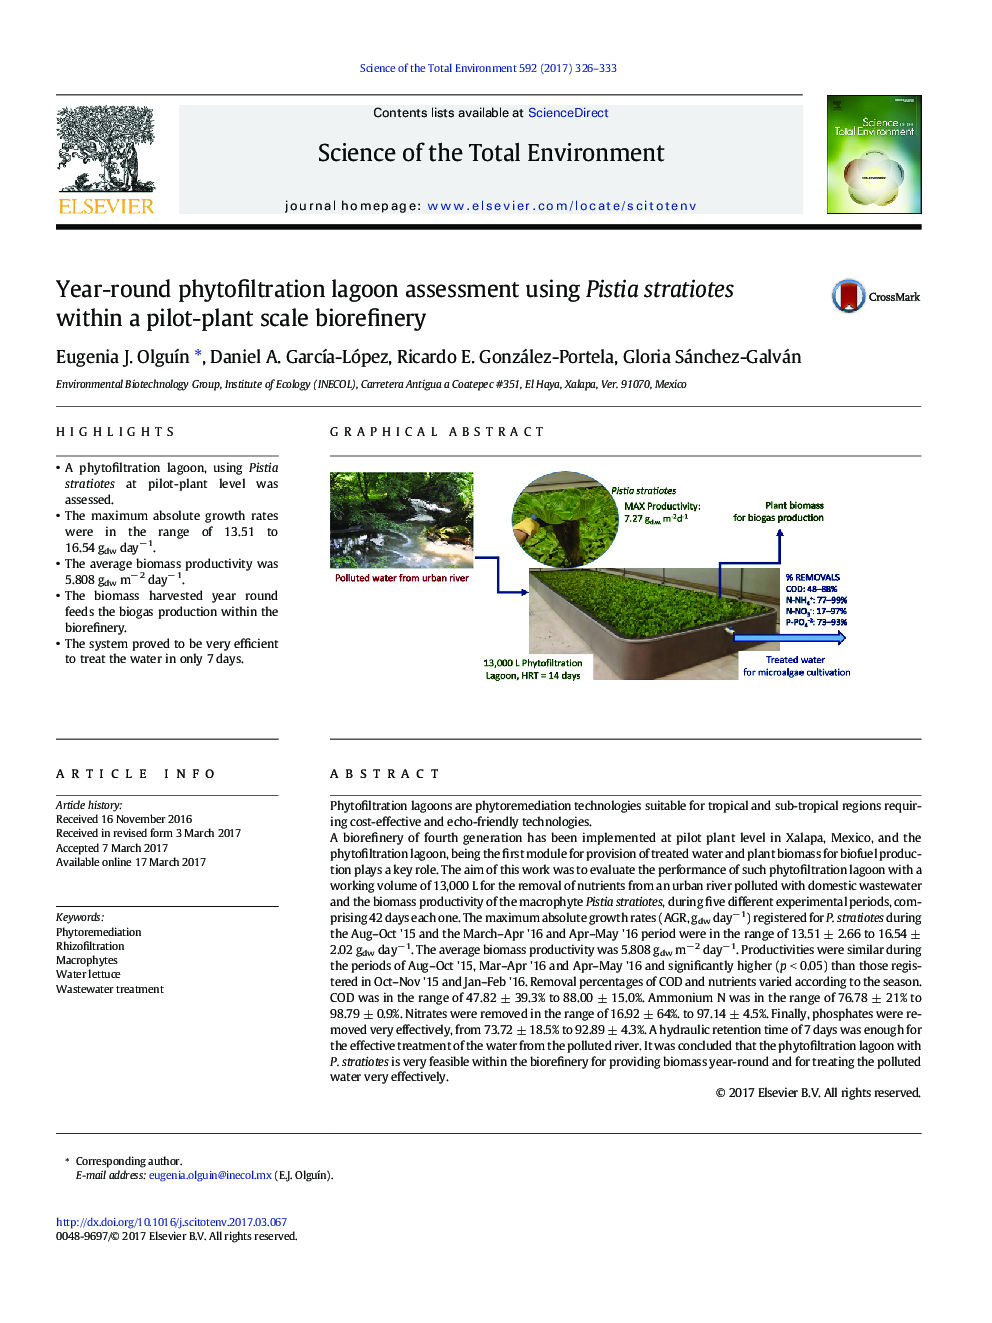 Year-round phytofiltration lagoon assessment using Pistia stratiotes within a pilot-plant scale biorefinery